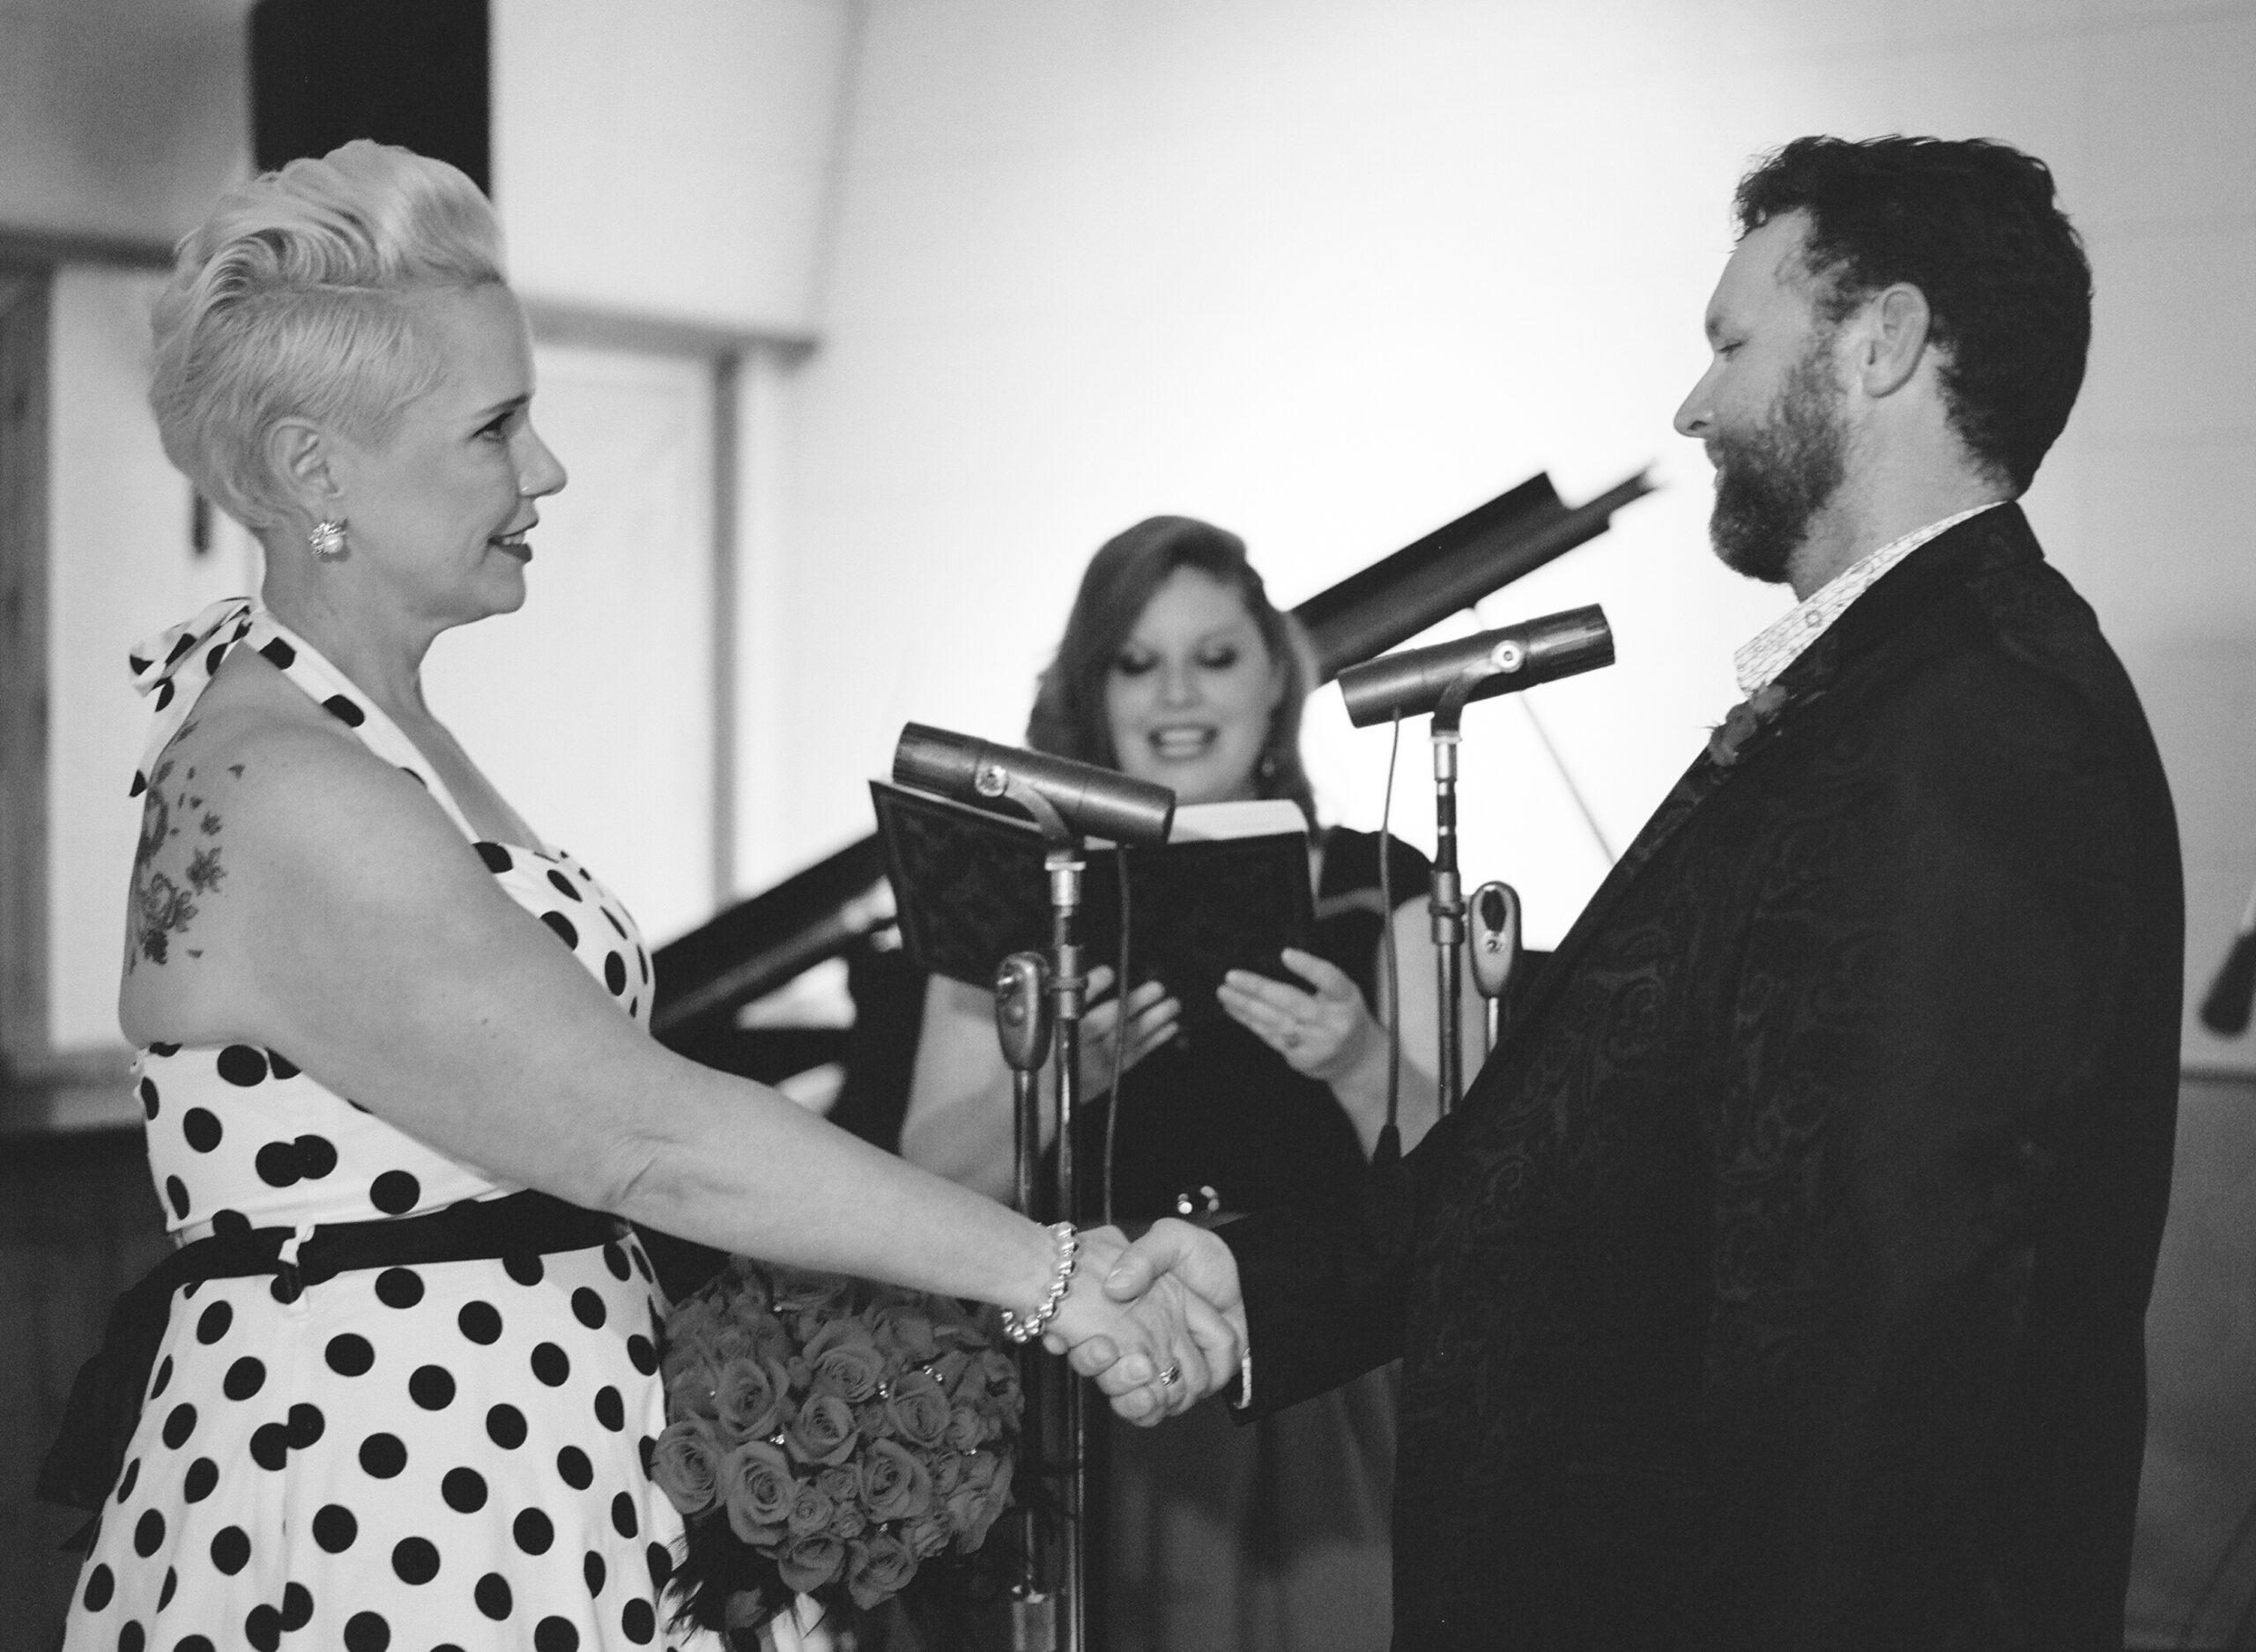 A black and white image of the wedding ceremony. With the officiant behind them holding a leather bound book, the bride and groom speak into microphones as they say their vows while holding hands. The groom and bride look into each other's eyes. The bride is wearing a halter neck white pinup dress with black polka dots. She has a black belt and a black crinoline petticoat. Her rose bouquet is accented with rhinestones and black feathers. She has pearl and rhinestone earrings and a silver beaded bracelet. The groom is wearing a black silk suit jacket with a paisley pattern, a white shirt with small flowers, a boutonniere. 